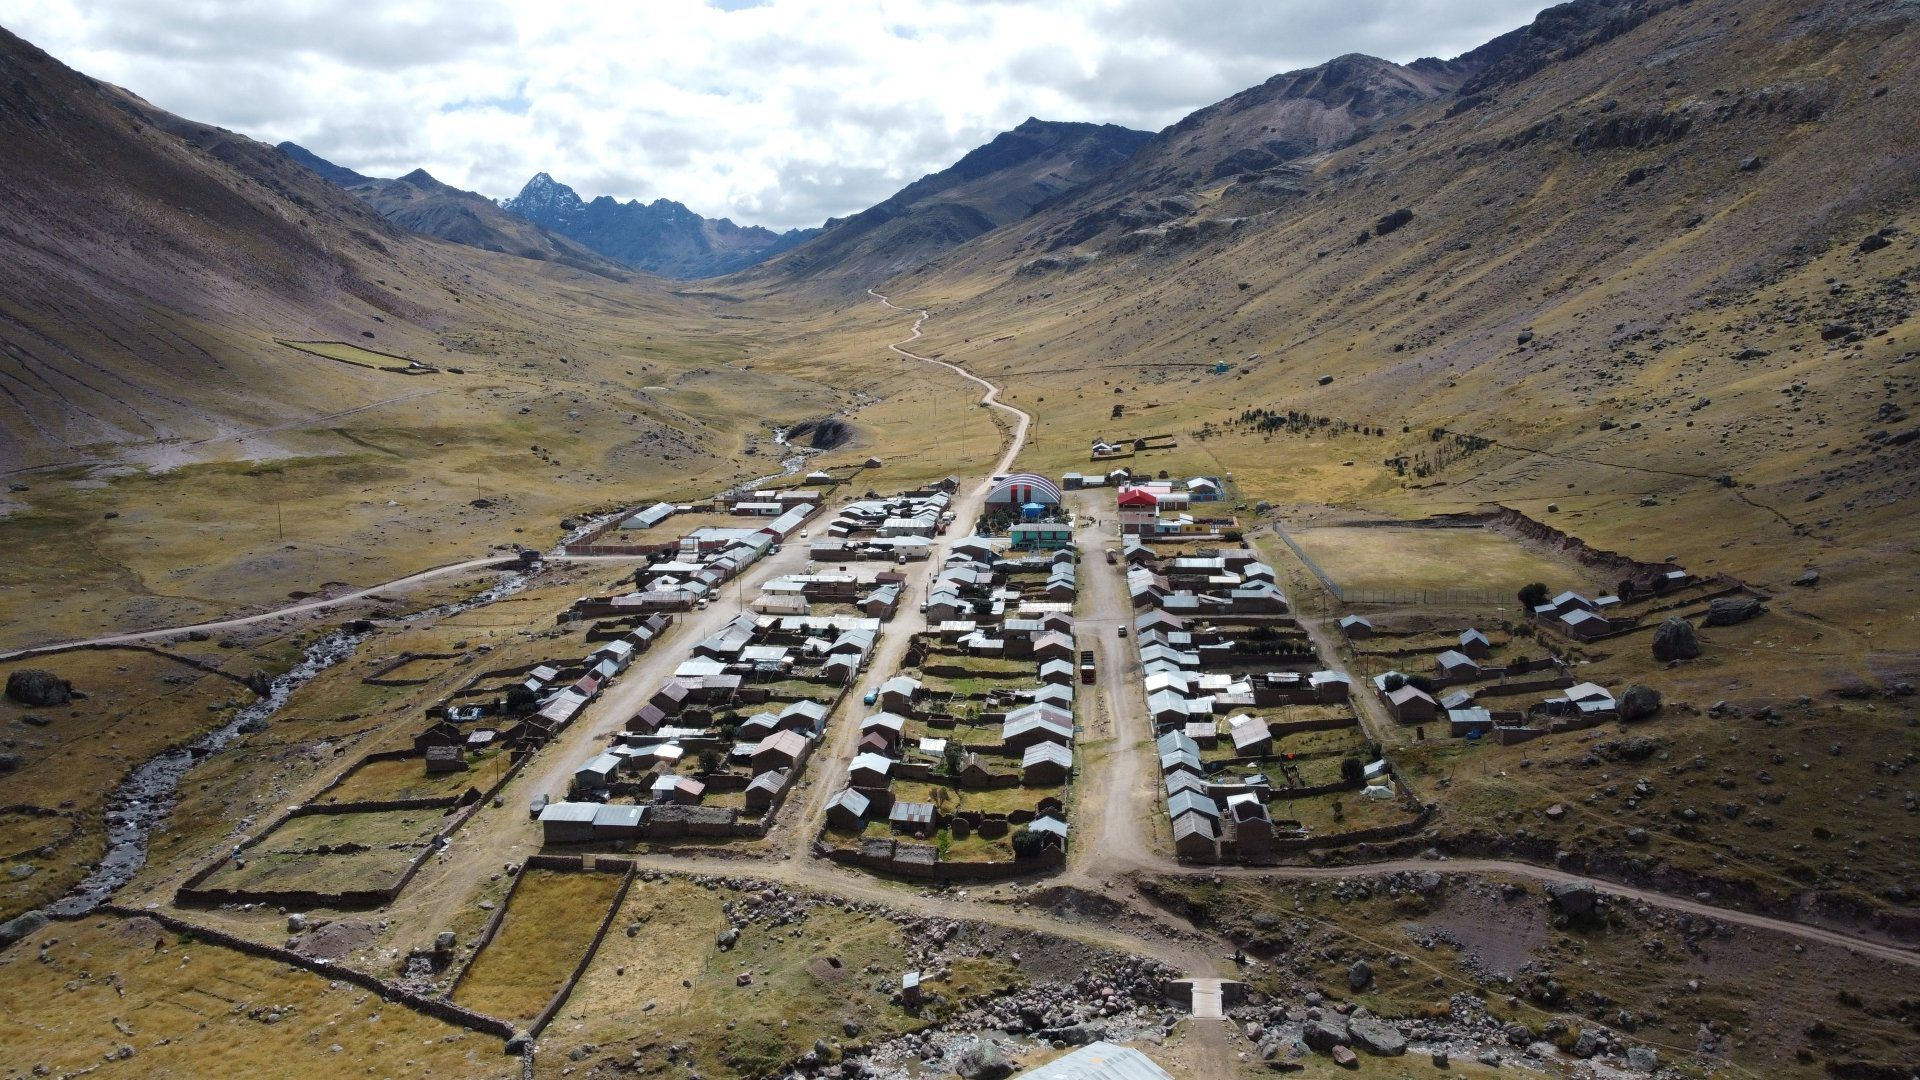 Village of Atcas in the Peruvian highlands